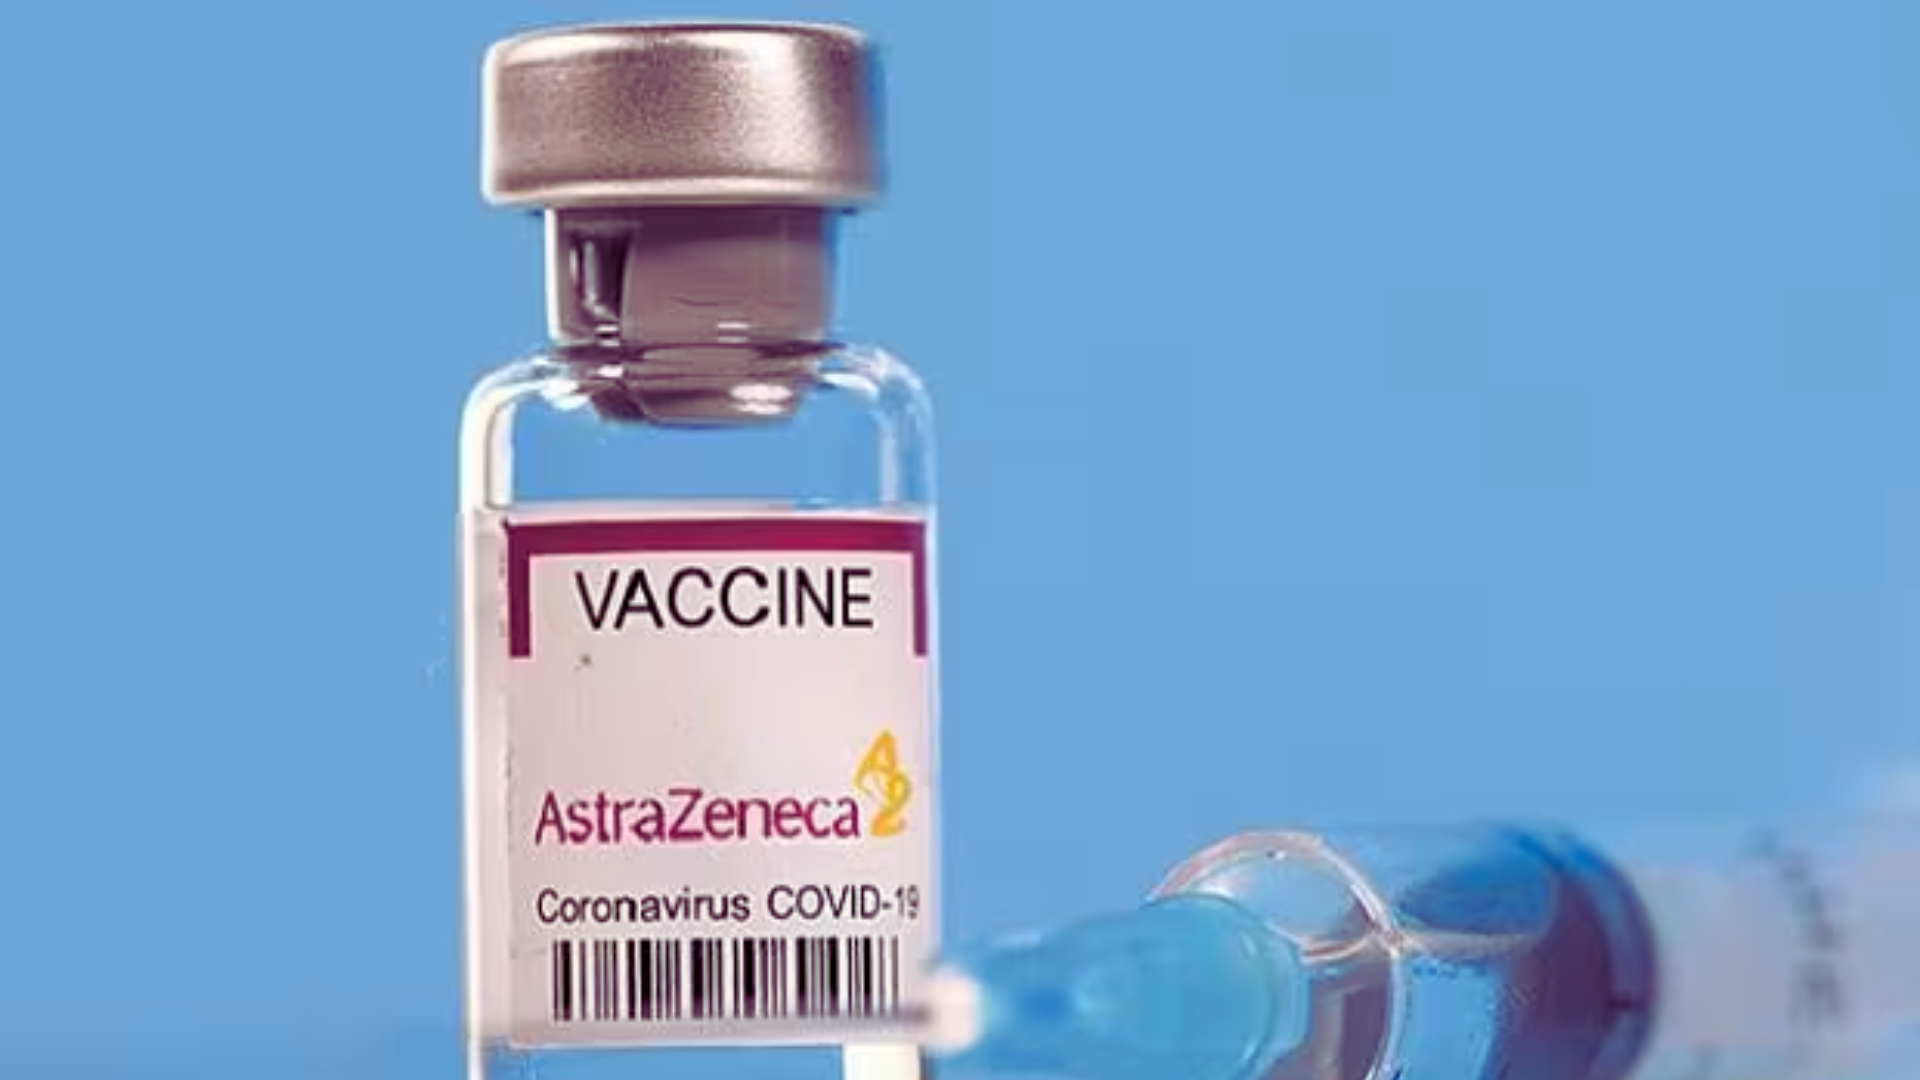 AstraZeneca Acknowledges In Court: COVID Vaccine May Rarely Cause TTS Side Effects